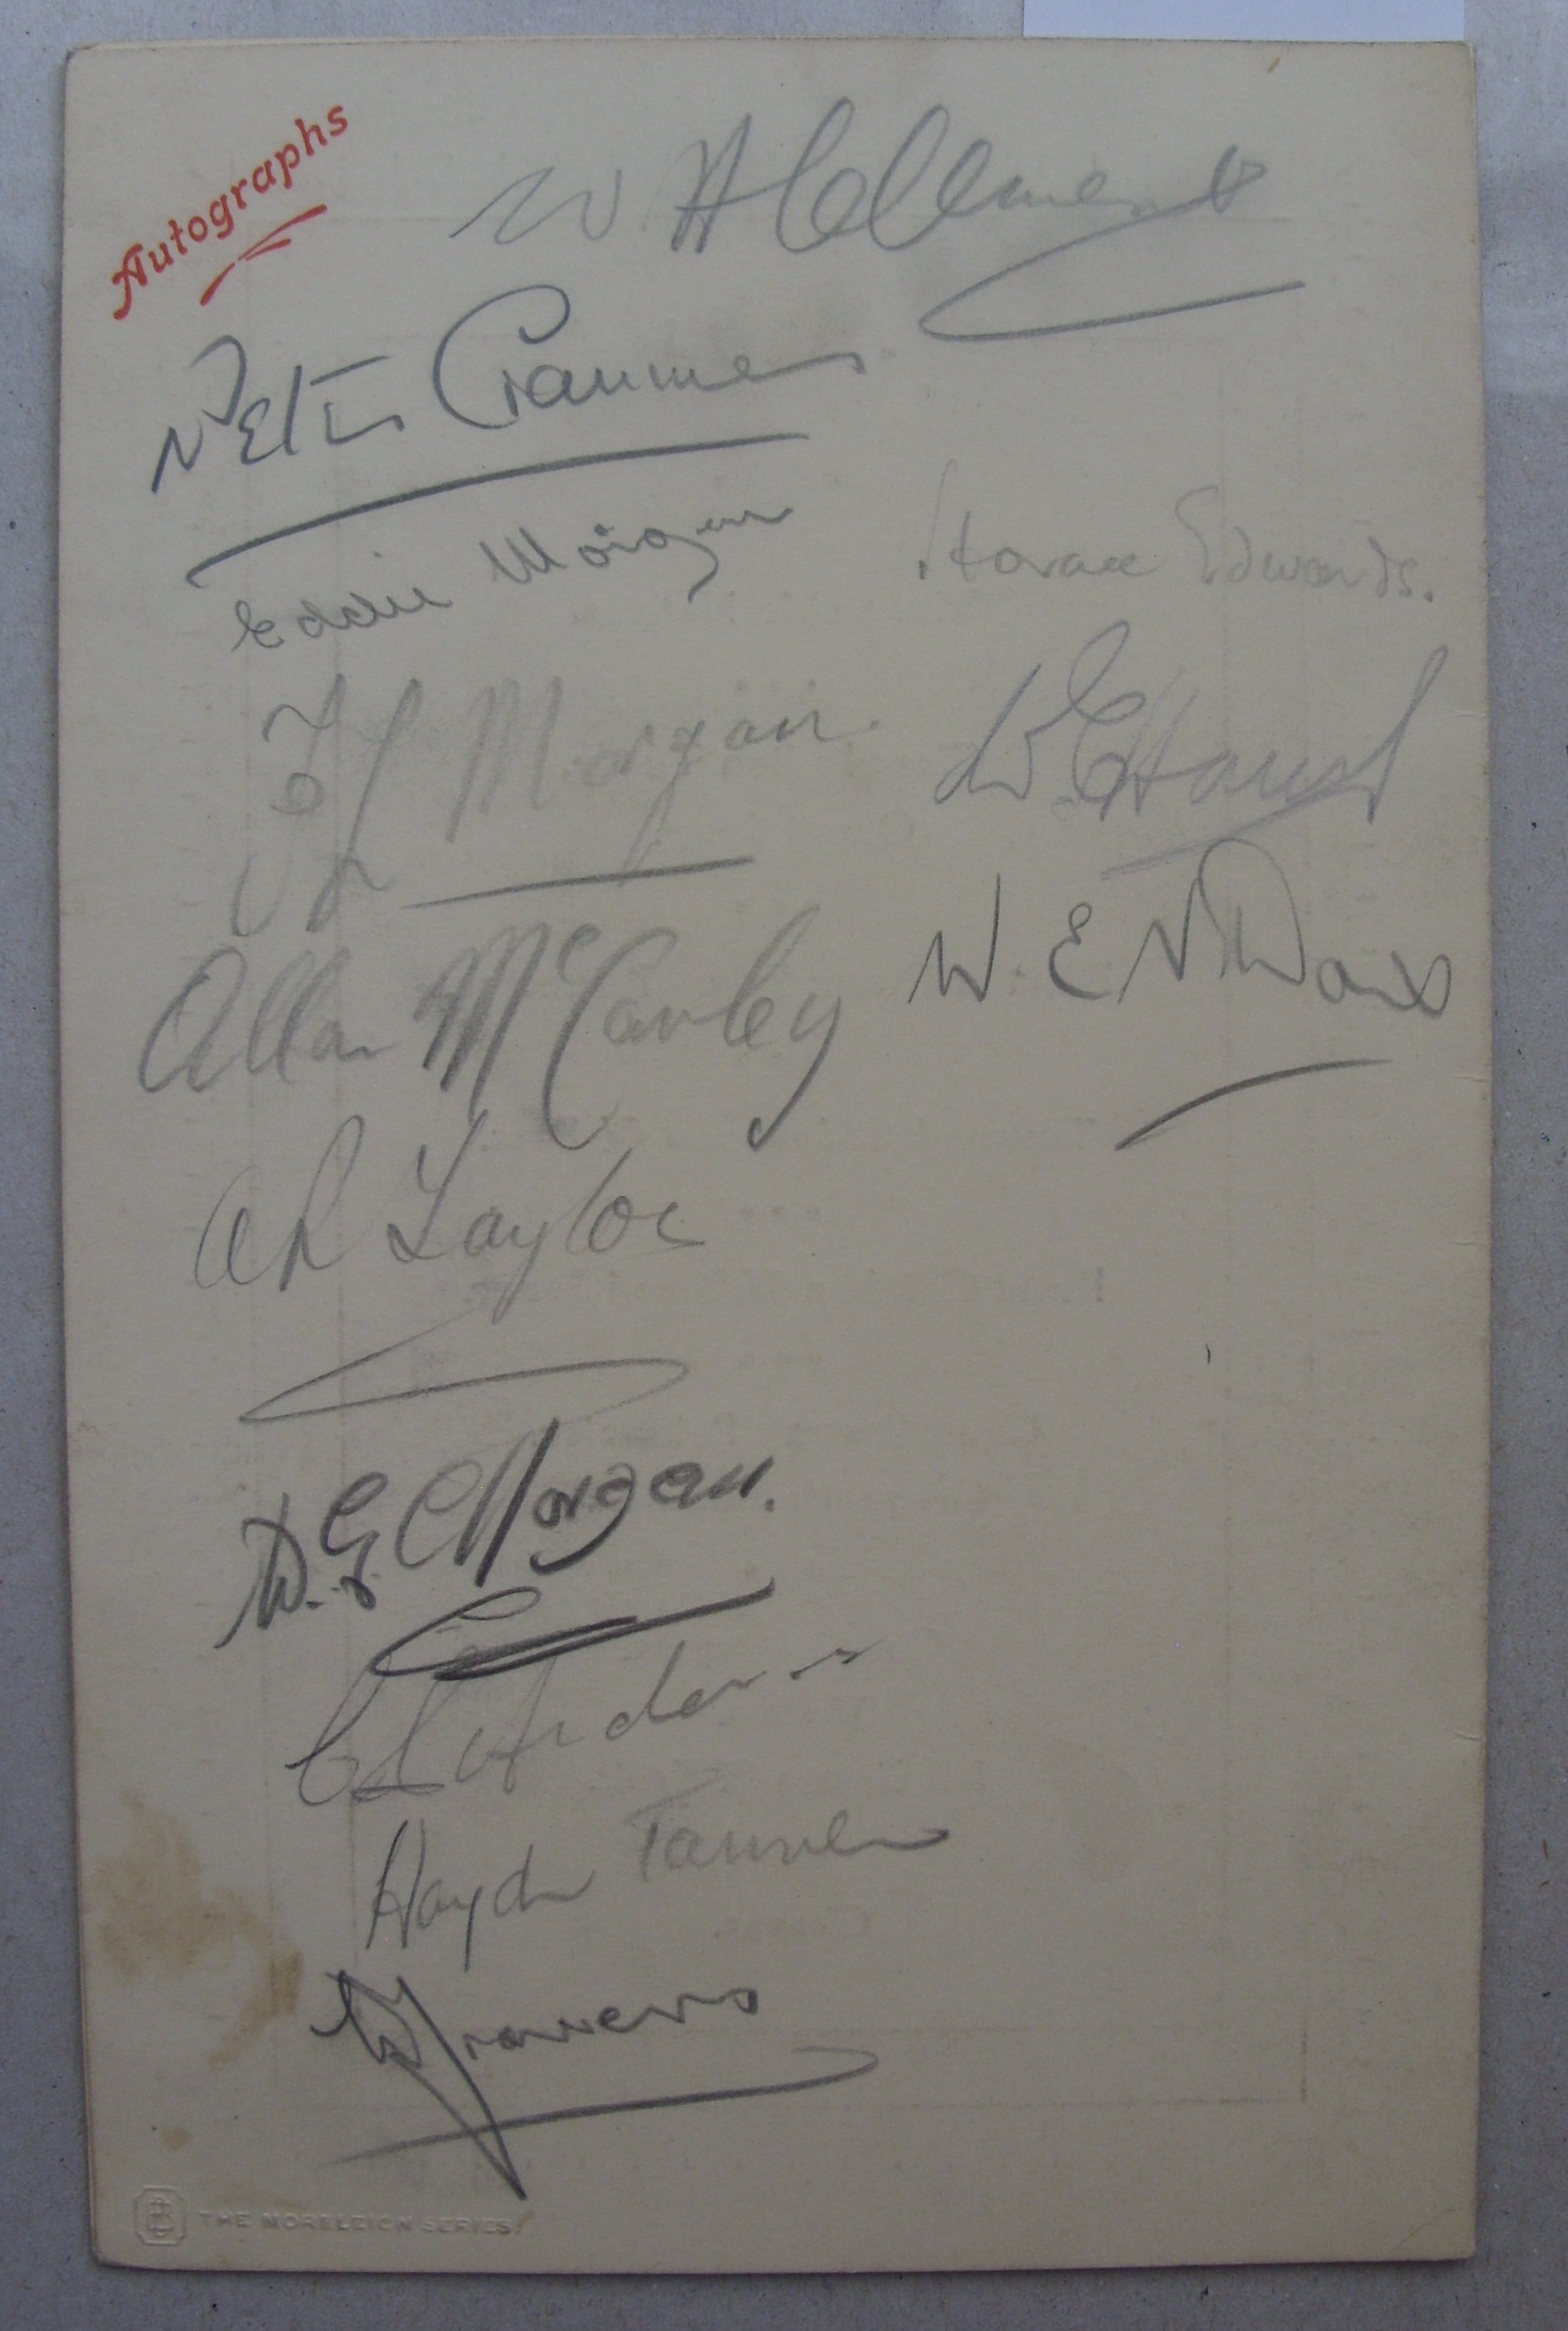 1938 Rugby Union, Wales v England, an autographed menu for the dinner held at the Queens Hotel, Card